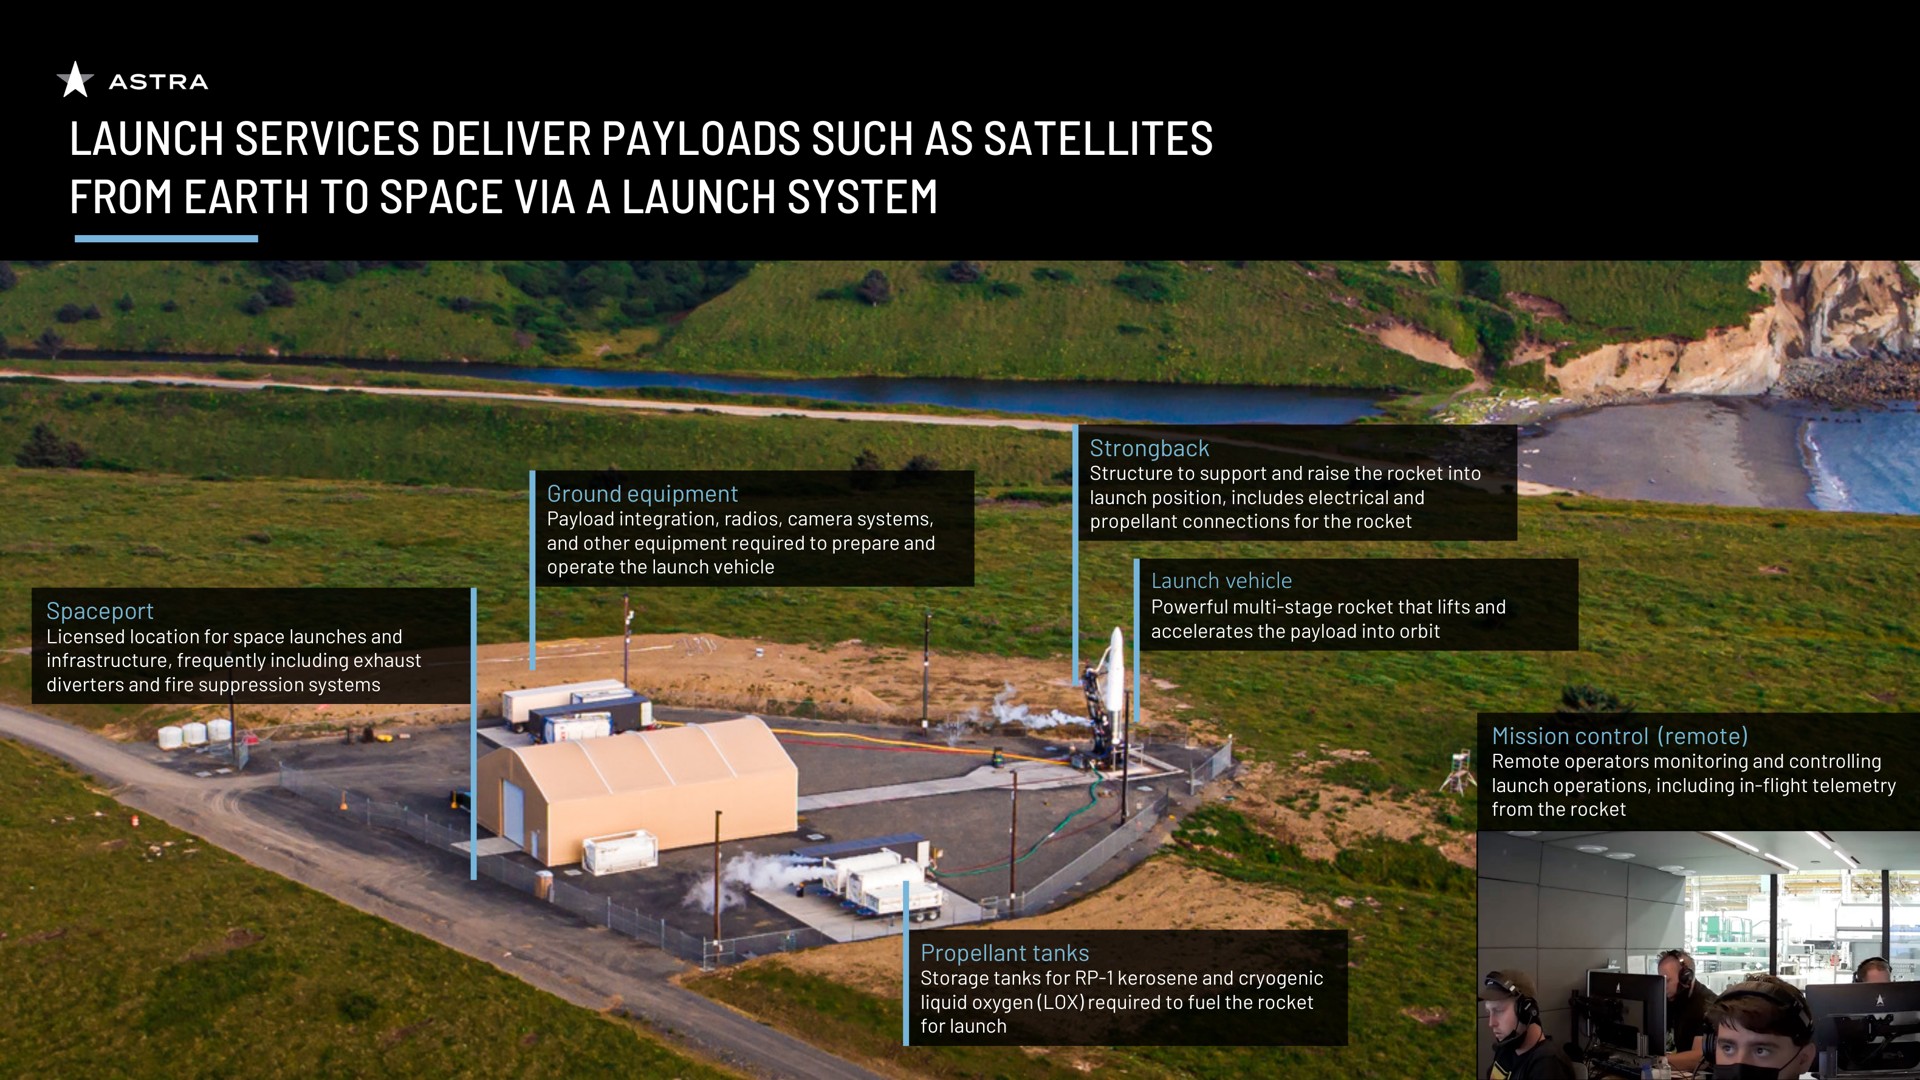 launch services deliver such as satellites from earth to space via a launch system | Astra